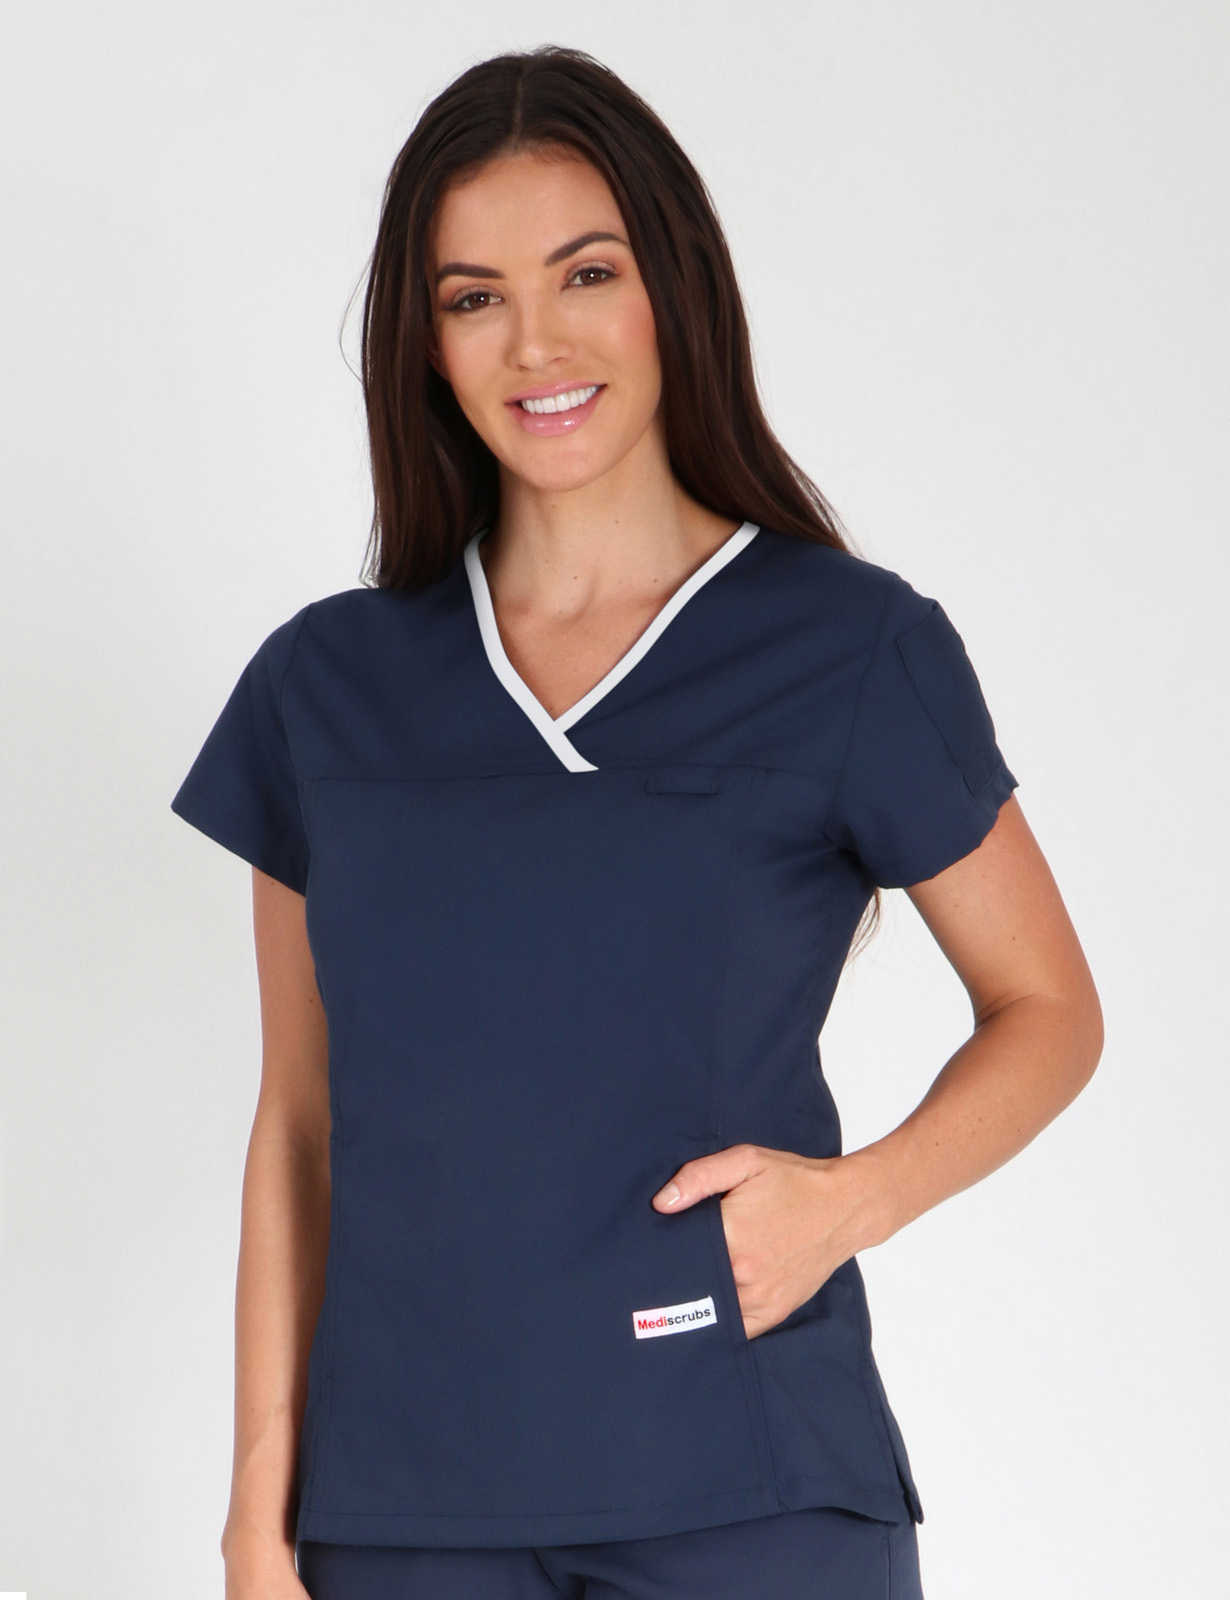 Women's Fit Solid Scrub Top with Contrast Trim